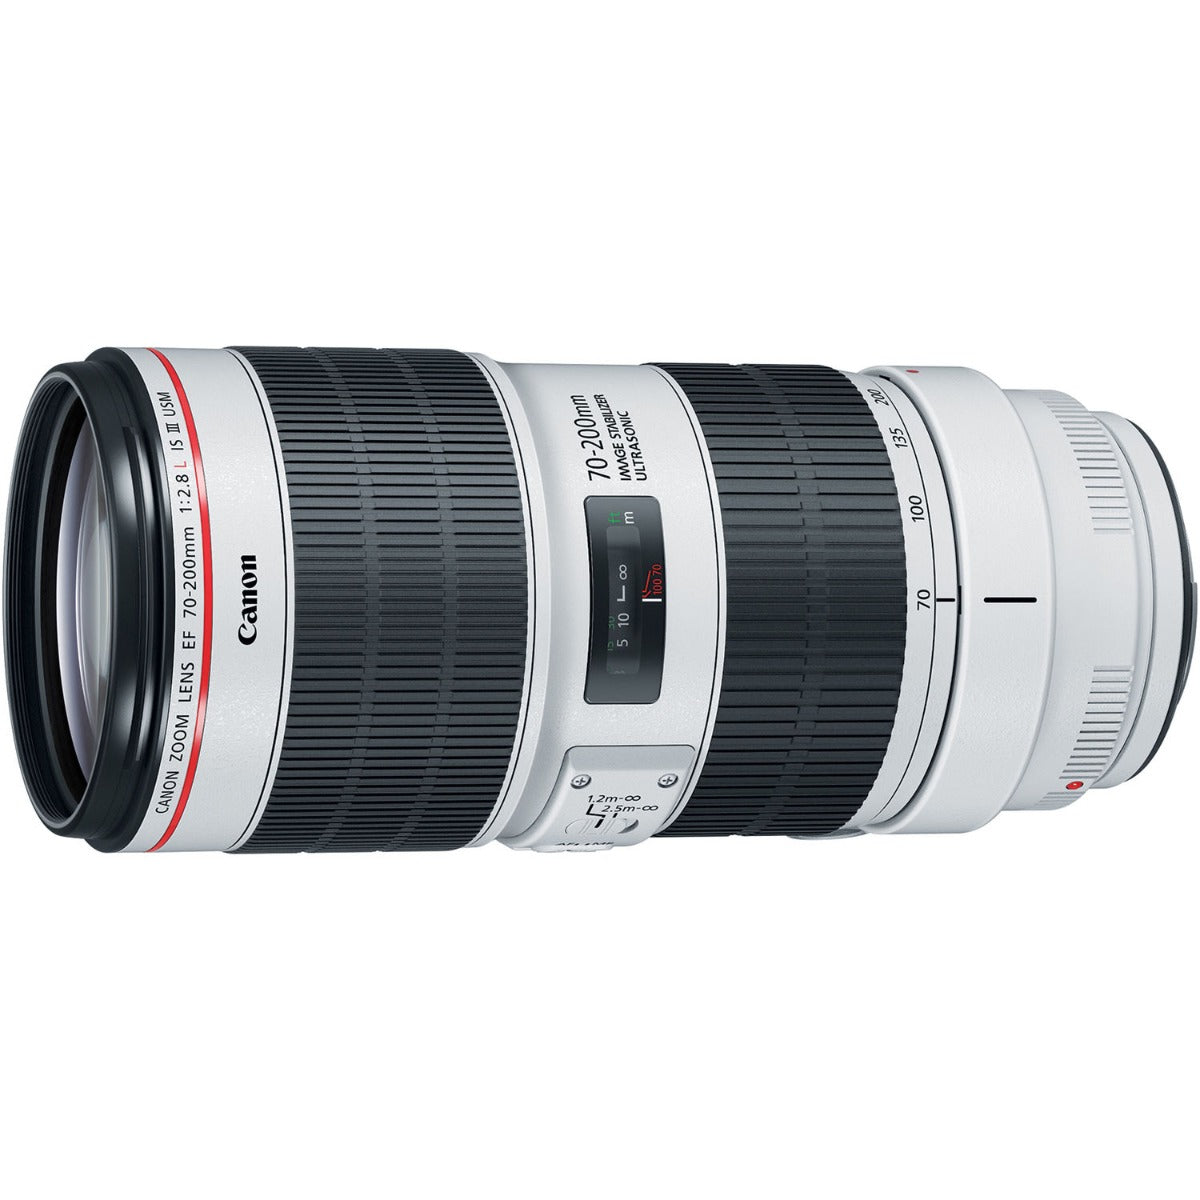 Canon EOS-1D X Mark III DSLR Camera with EF 70-200mm f/2.8L IS III USM Lens